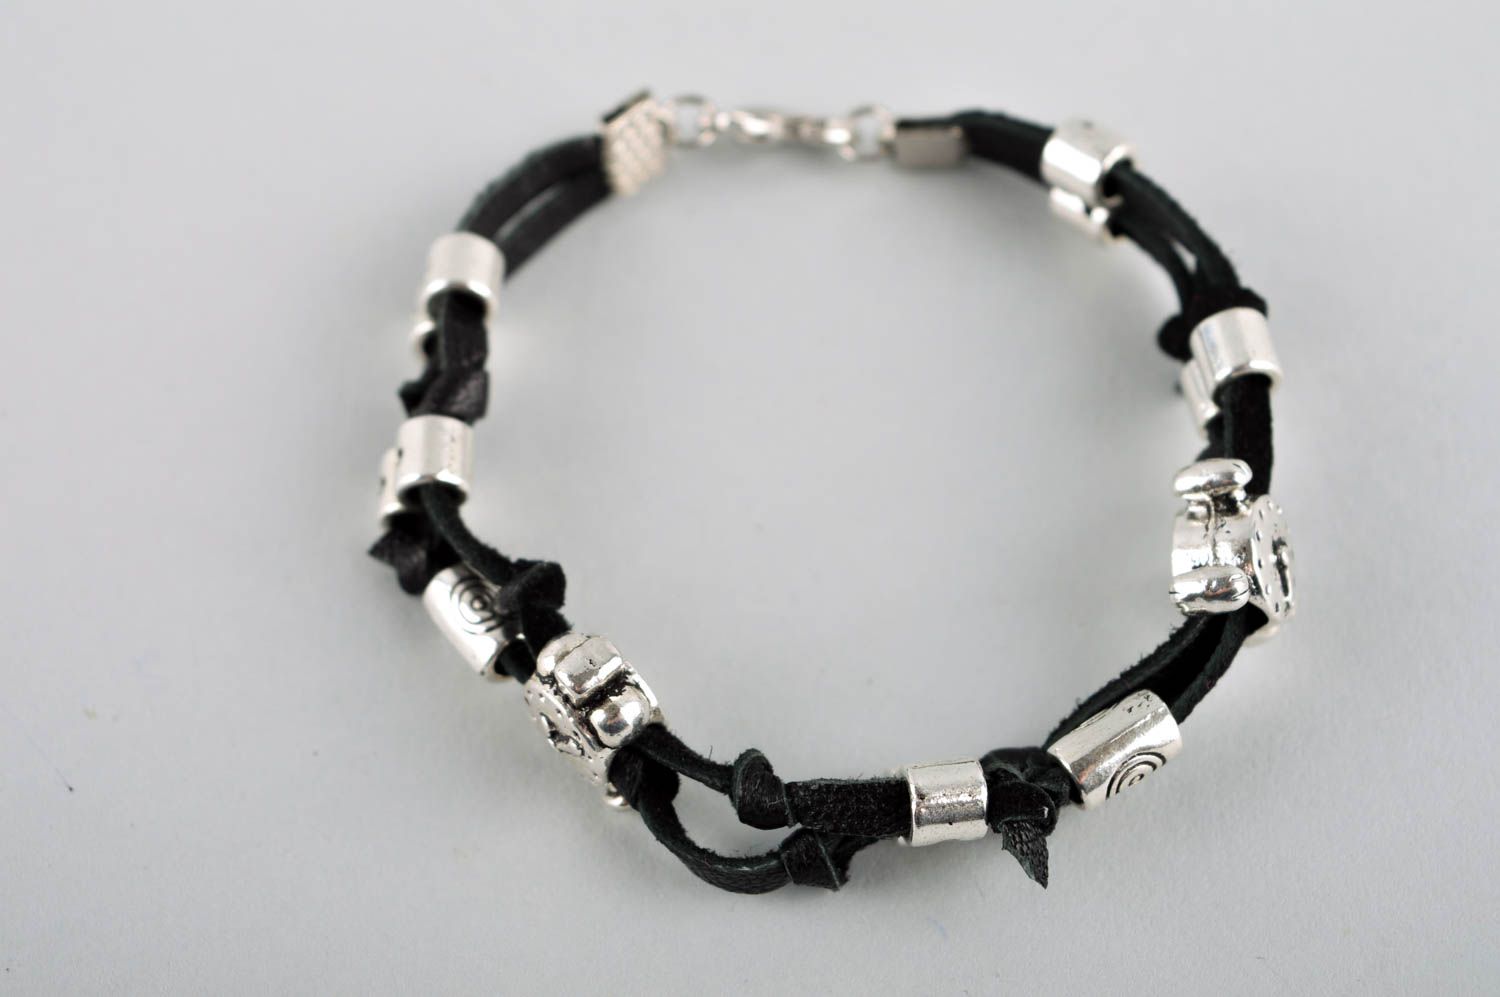 Handmade black cord bracelet with unisex metal charms and beads photo 2